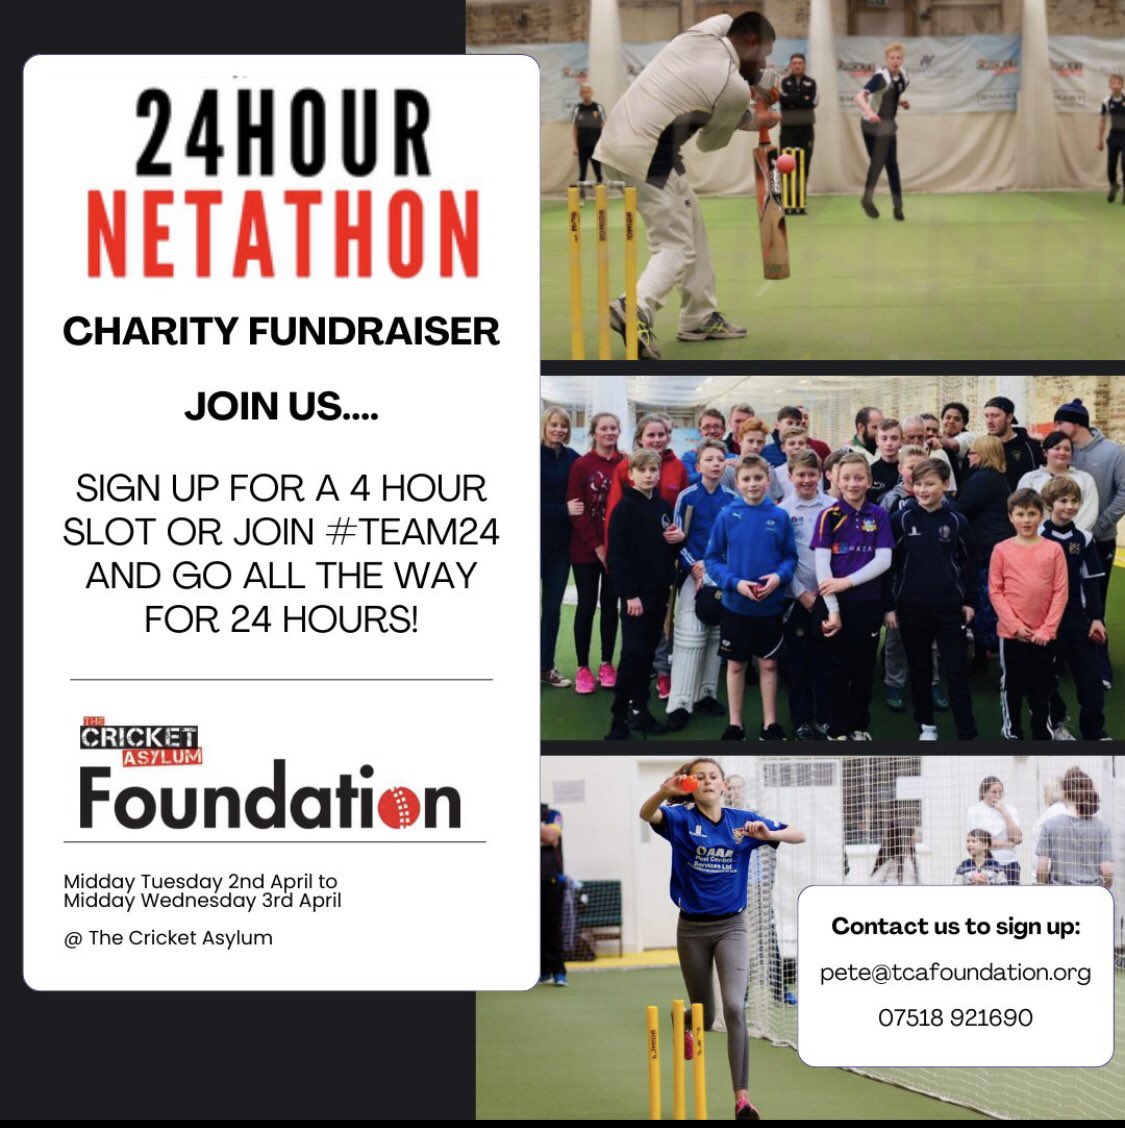 Proud to be a Trustee of @TCA_Foundation, a Halifax 🏏 charity doing loads for the community. Our main fundraising event, the 24hr Netathon, is next week! Please come & get involved, open to all but also @Halifaxjuniorc1 Tavs session, Women’s Lanes, overnight indoor comp, Iftar!